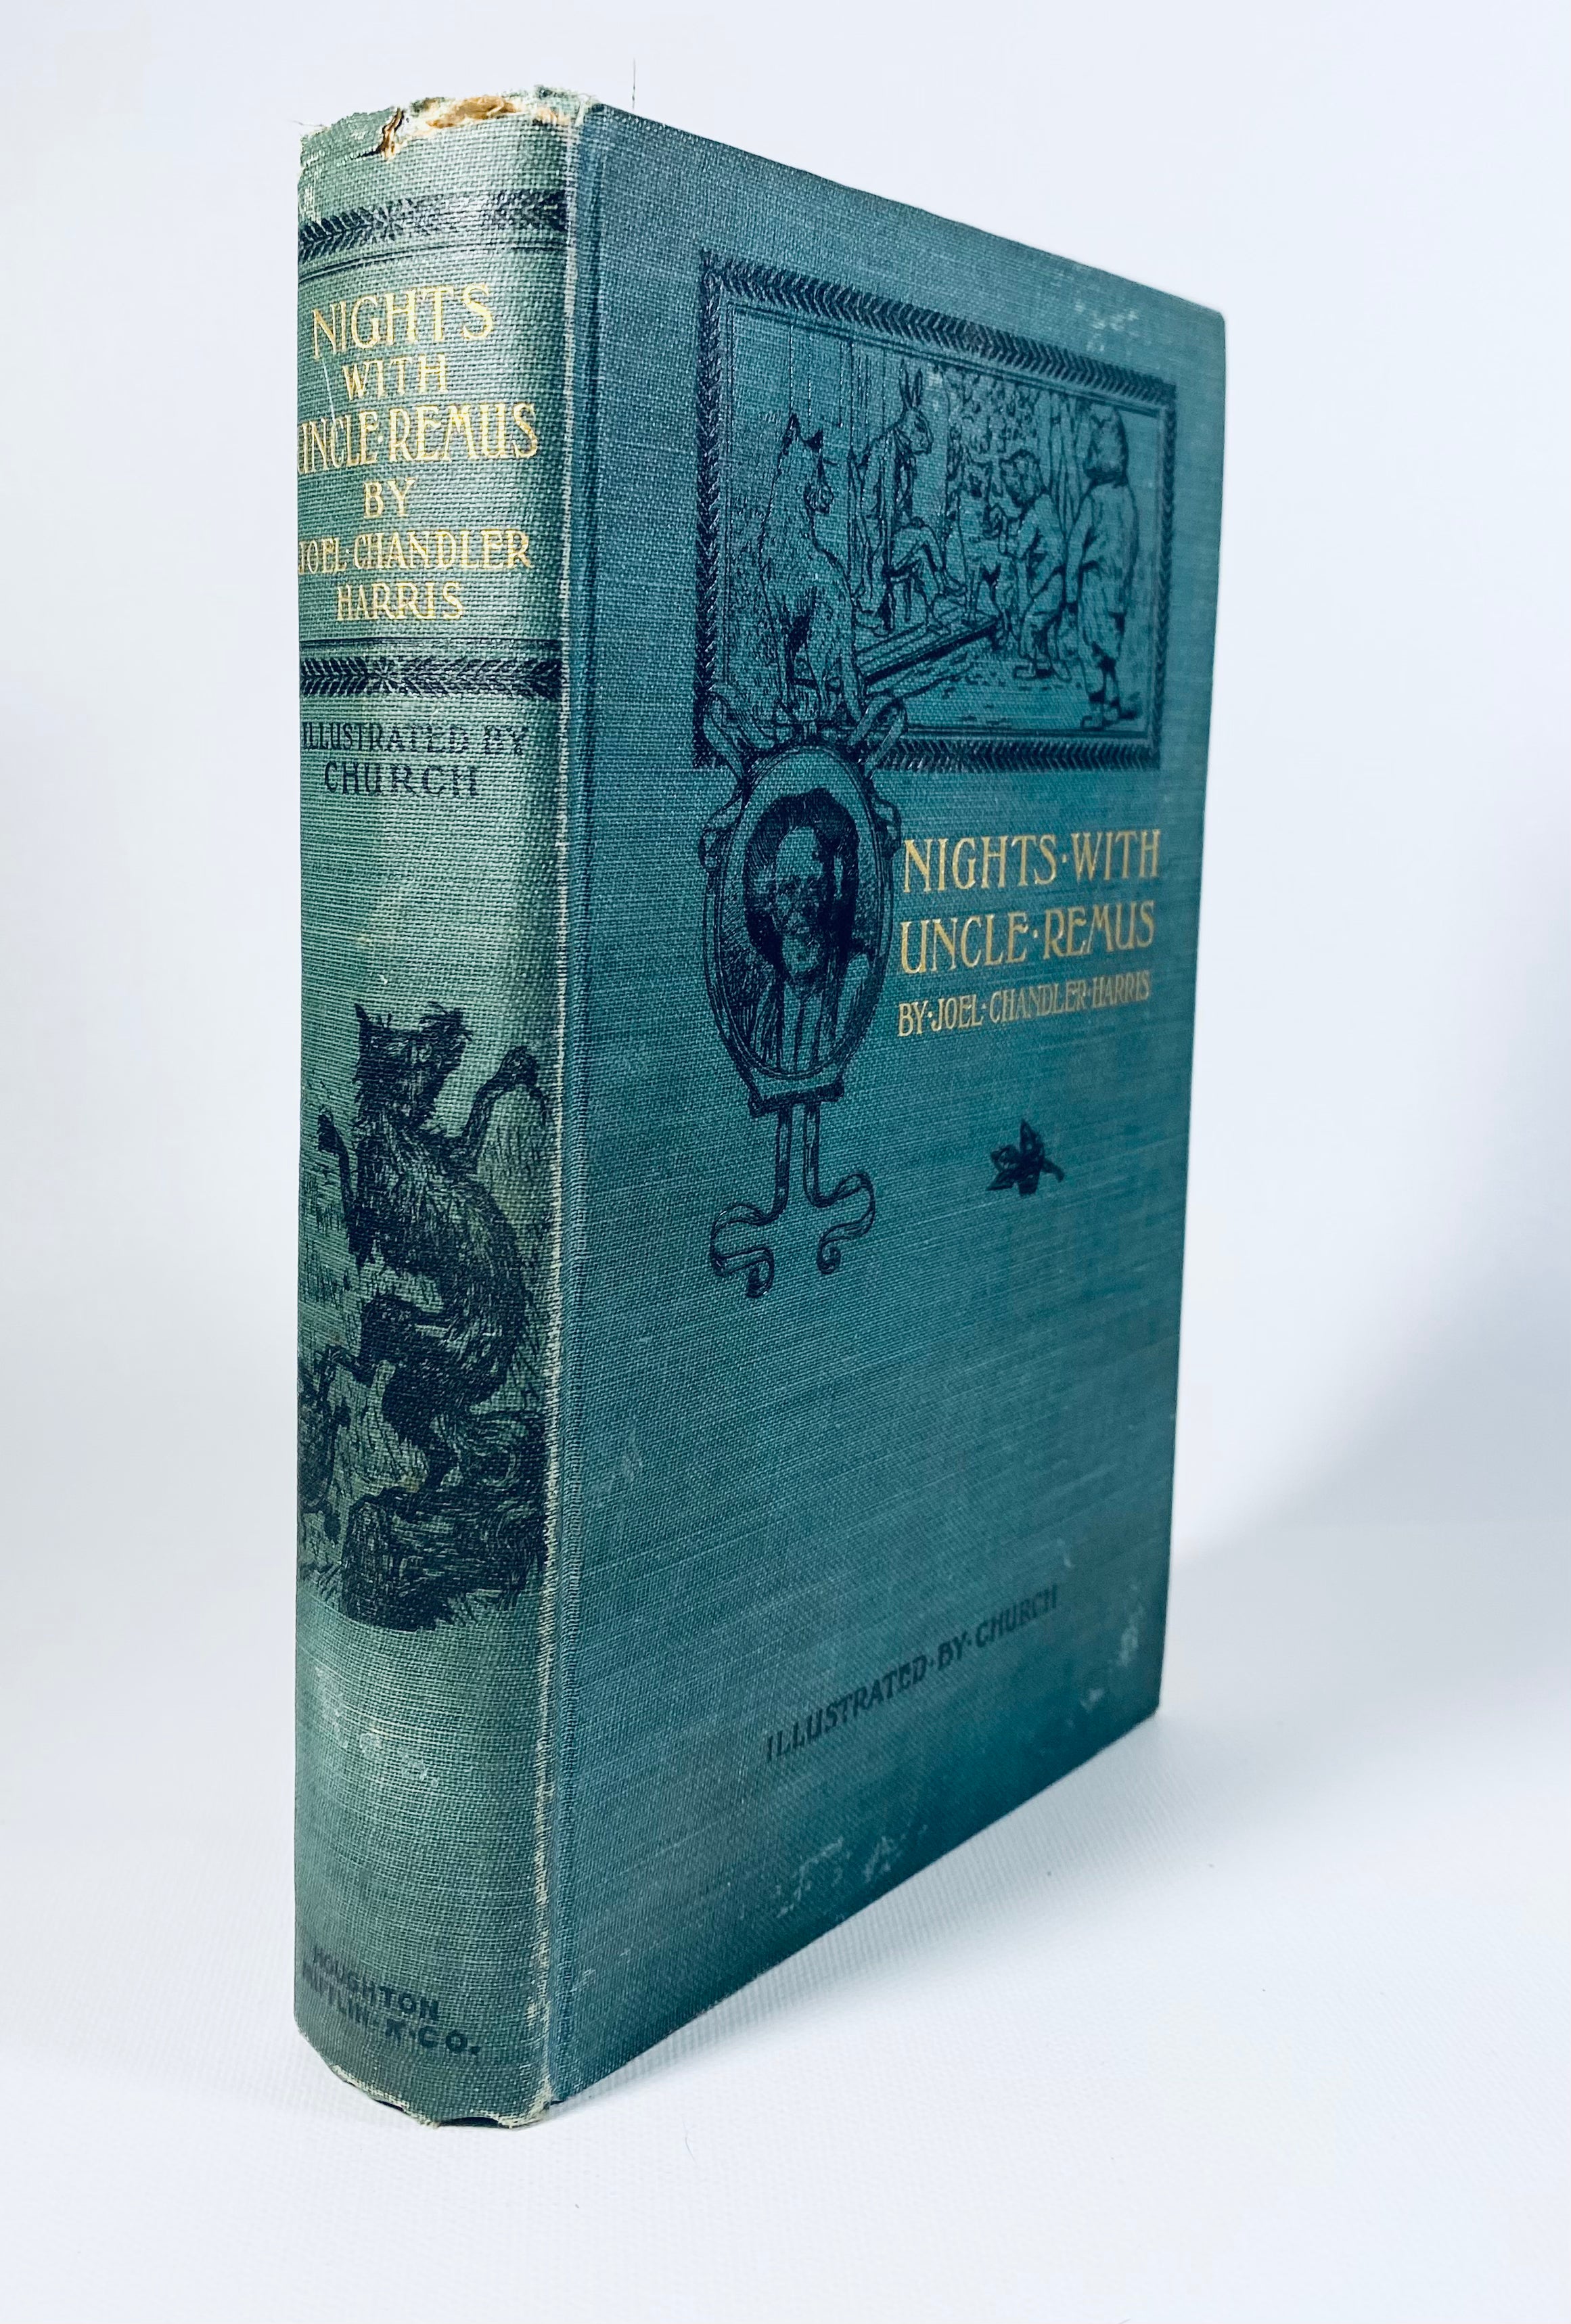 Nights with Uncle Remus: Myths and Legends of the Old Plantation by Joel Chandler Harris